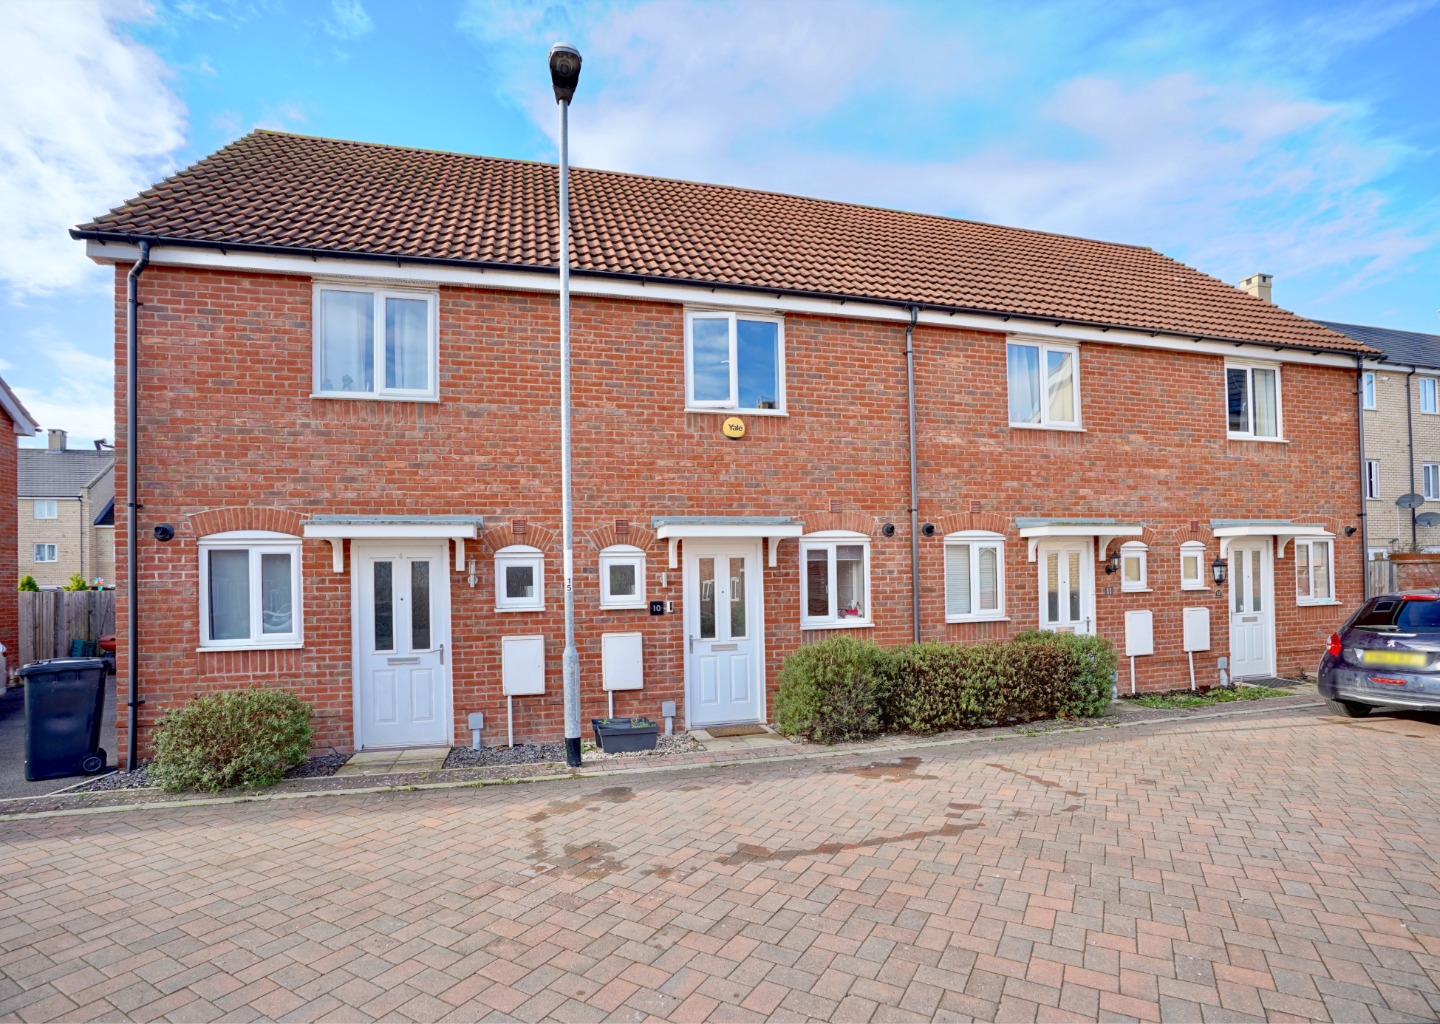 2 bed terraced house for sale in Crocus Close, St. Neots, PE19